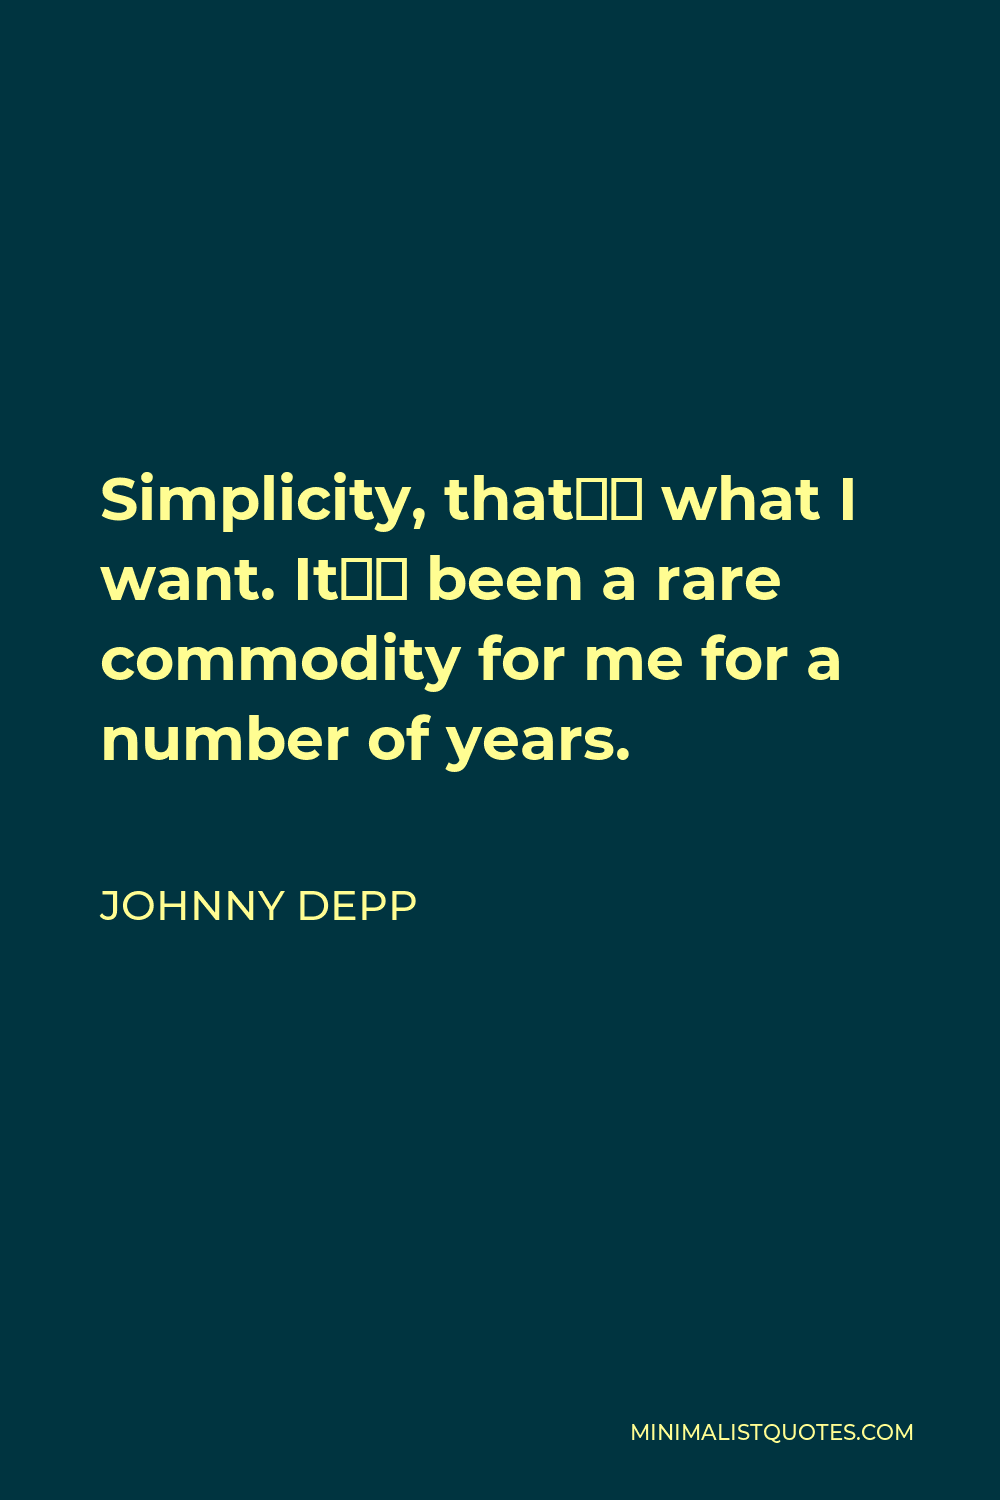 Johnny Depp Quote - Simplicity, that’s what I want. It’s been a rare commodity for me for a number of years.